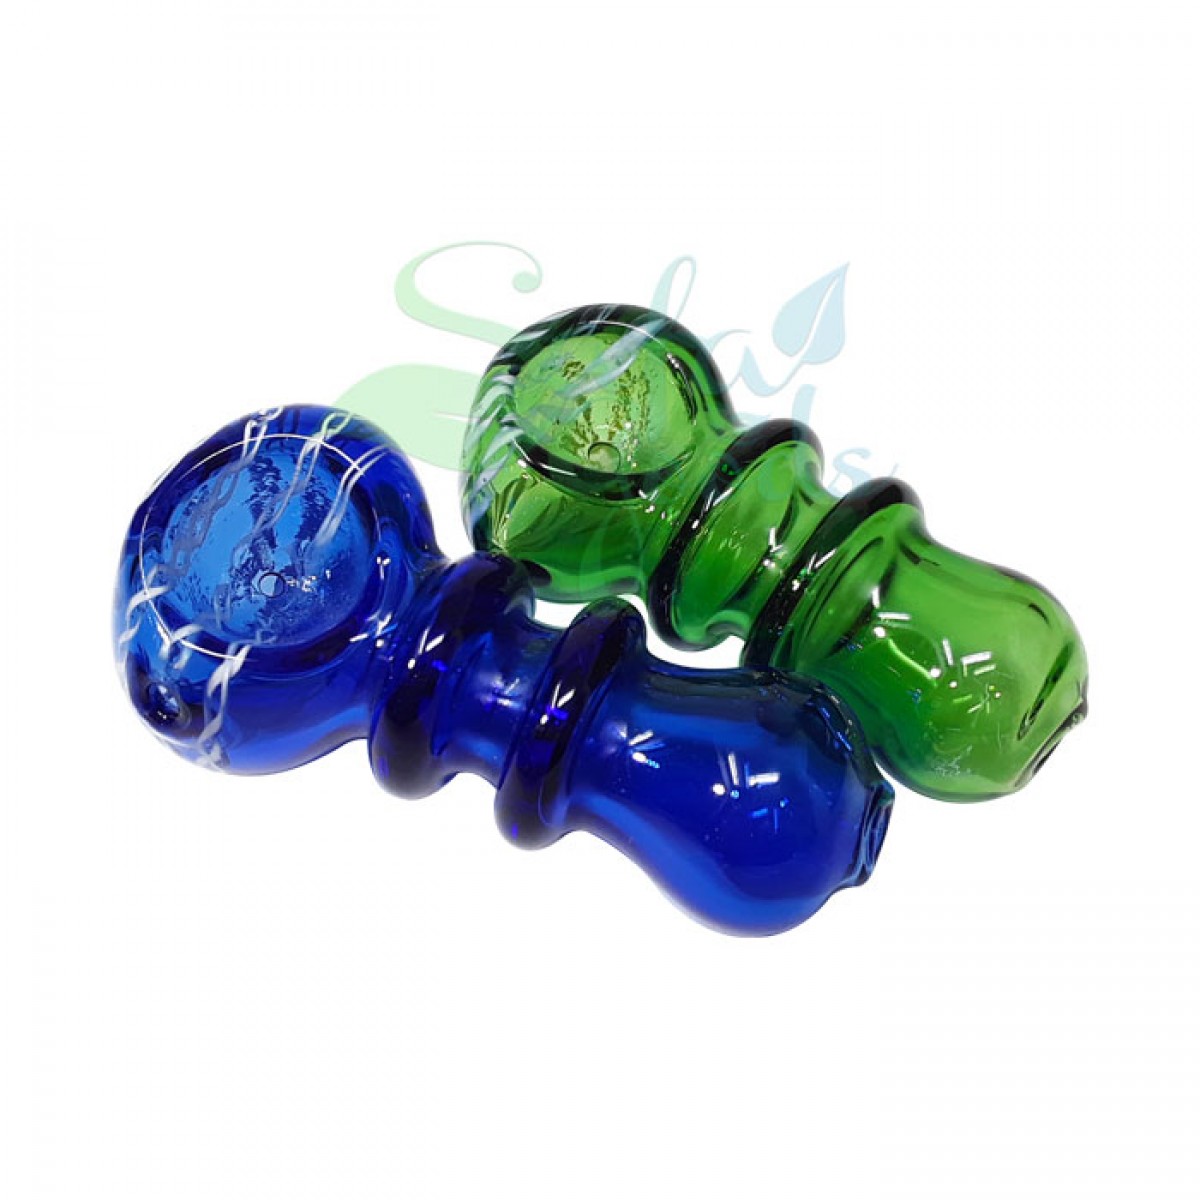 2.5 Inch Glass Hand Pipes